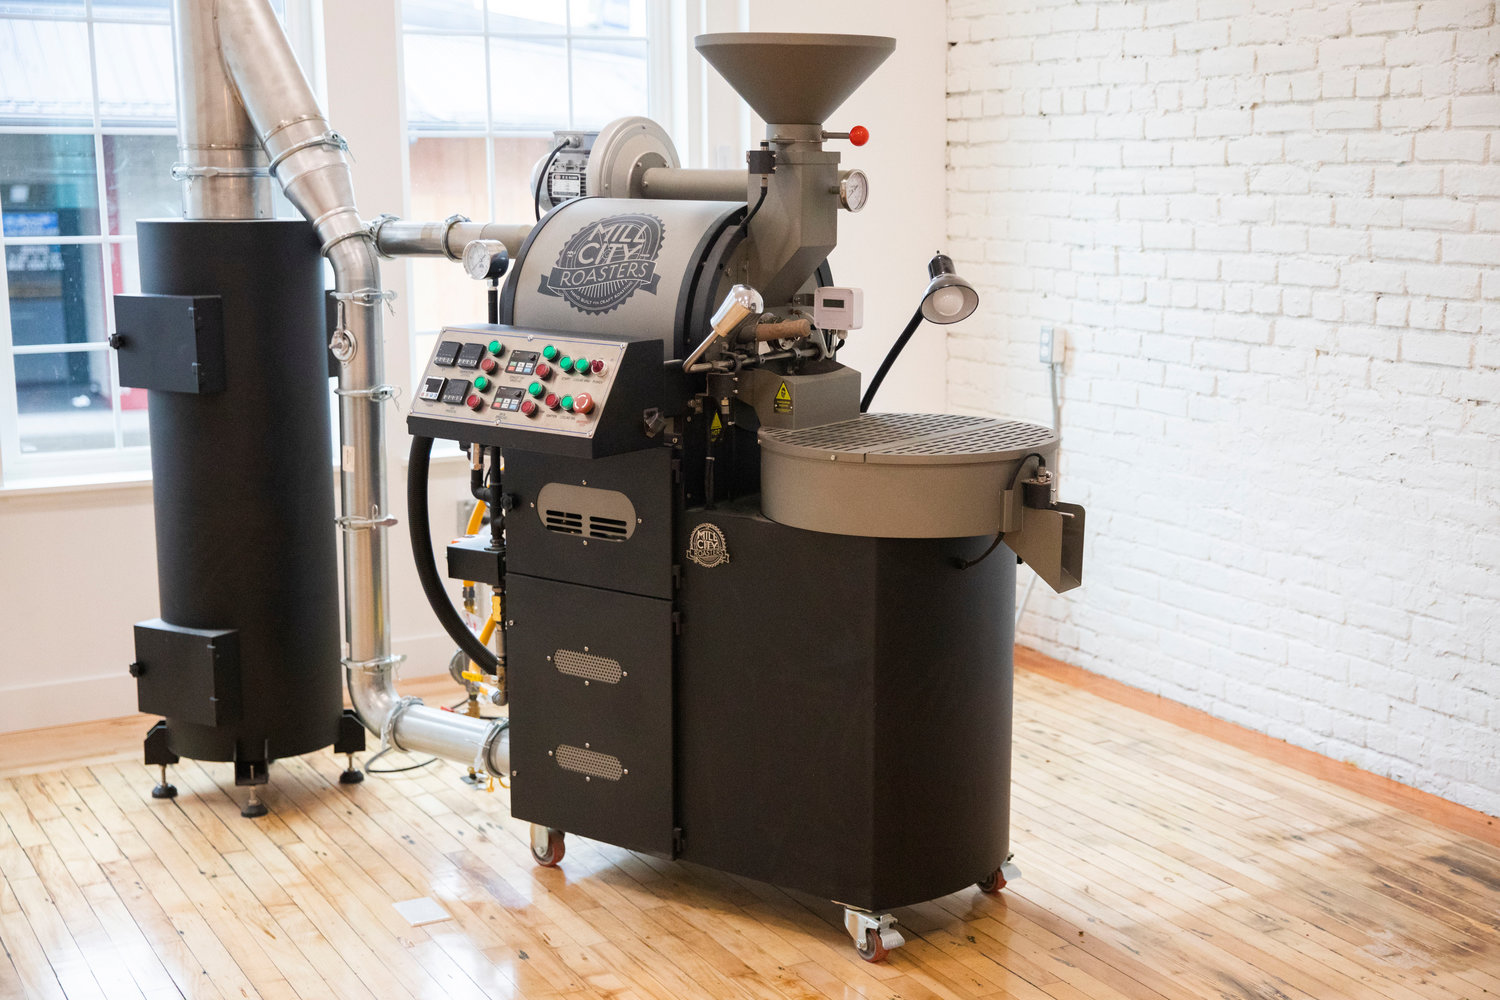 All coffee is roasted in-house in Chehalis at Mint City Coffee Roasting.